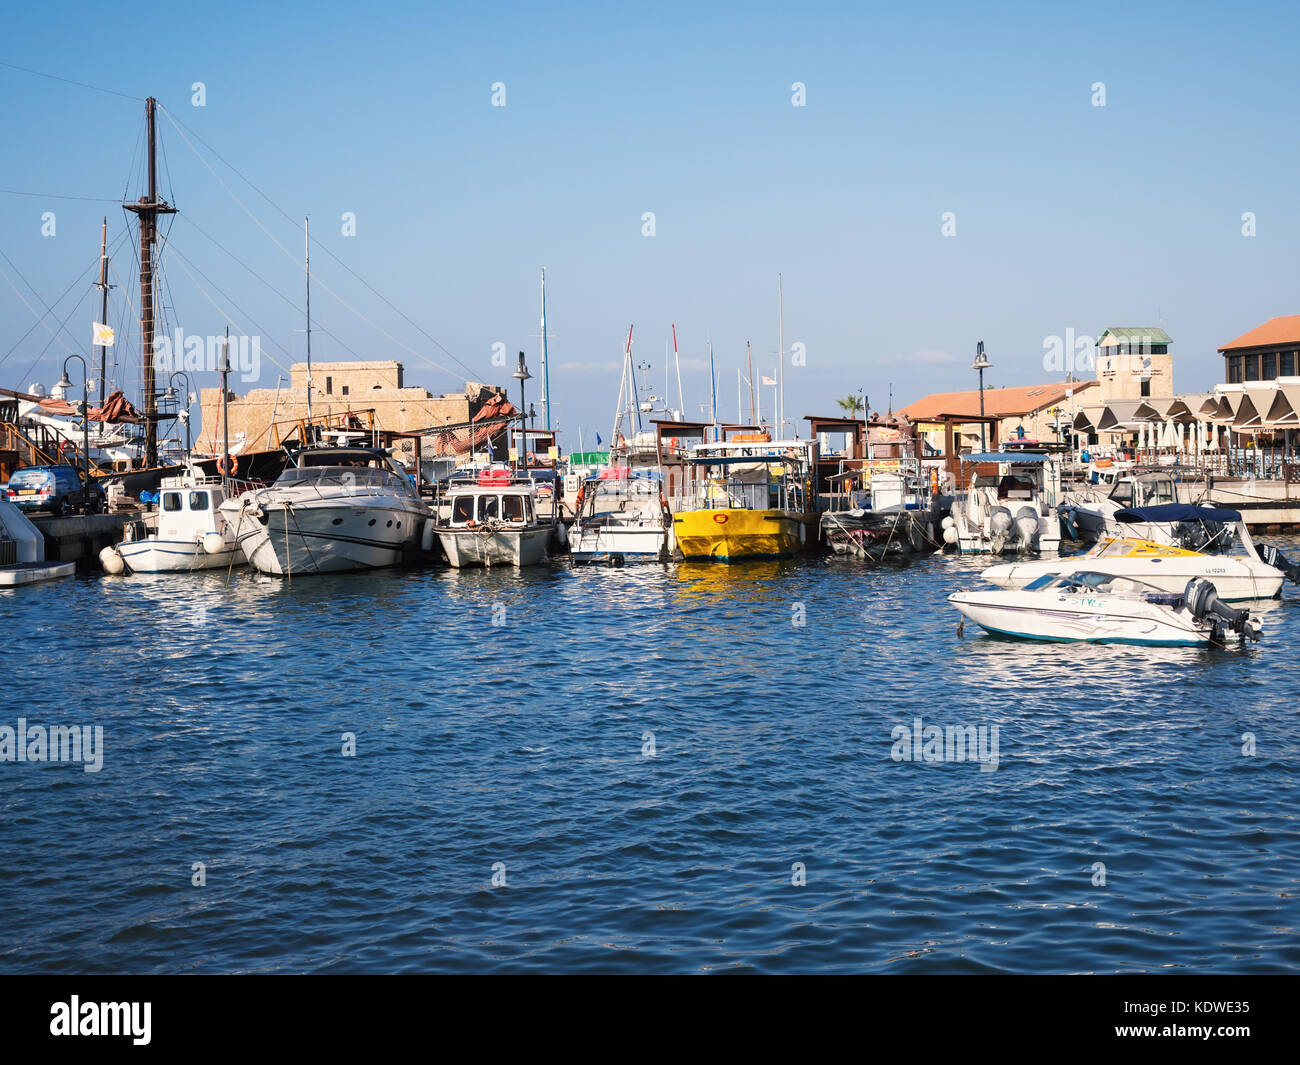 Paphos, Cyprus - July 11, 2016: Yachts and boats moored at a harbour Stock Photo